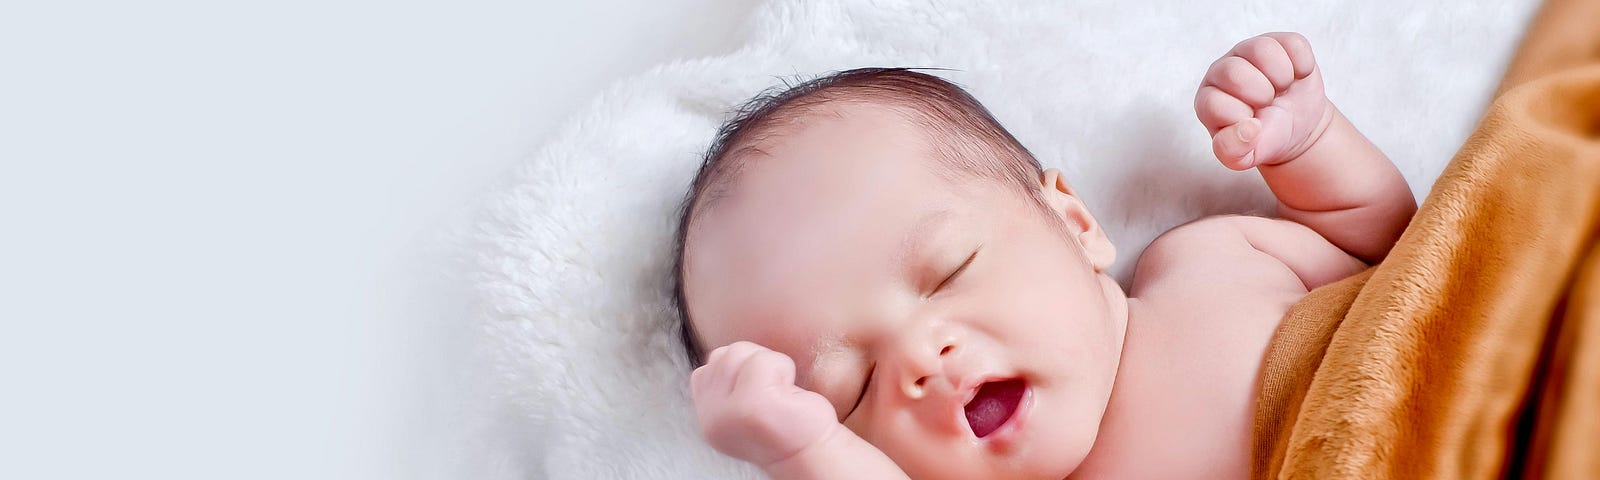 Newborn baby stretching and opening his mouth